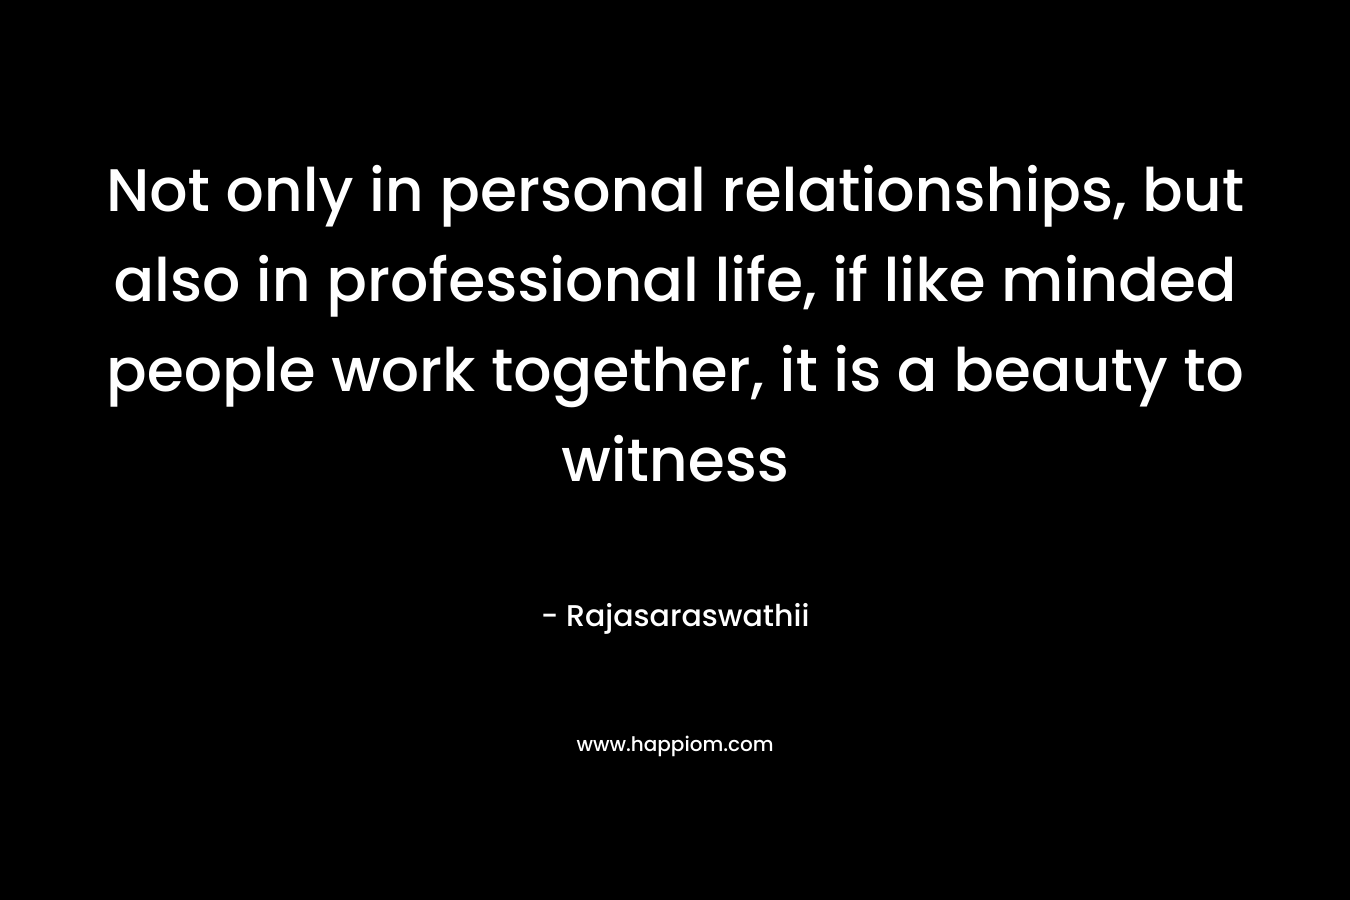 Not only in personal relationships, but also in professional life, if like minded people work together, it is a beauty to witness